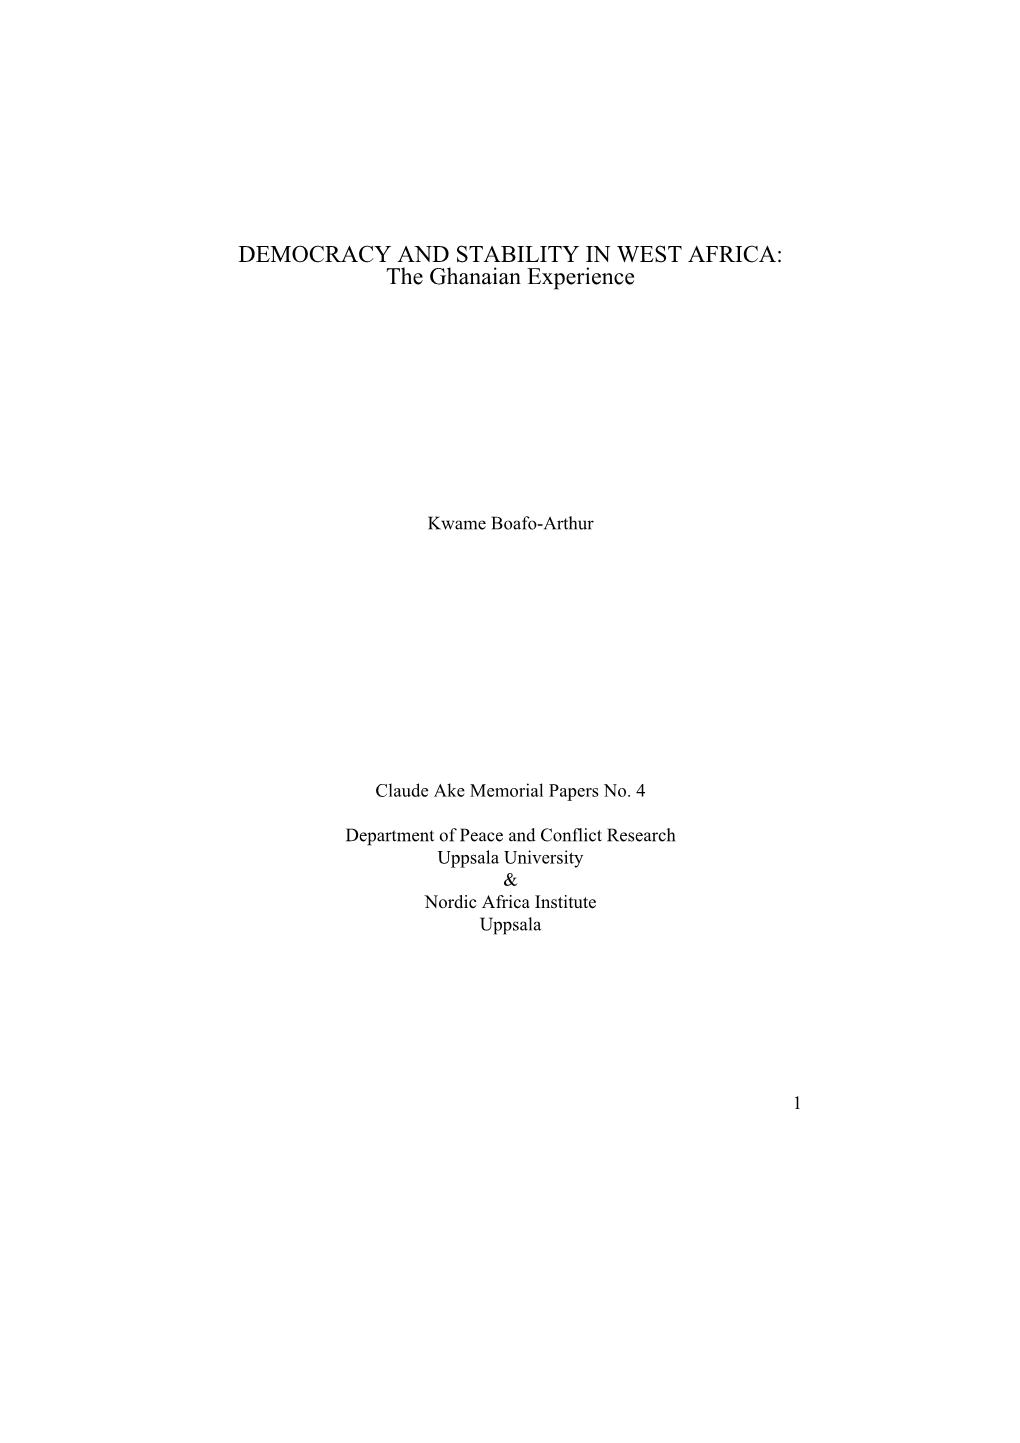 DEMOCRACY and STABILITY in WEST AFRICA: the Ghanaian Experience